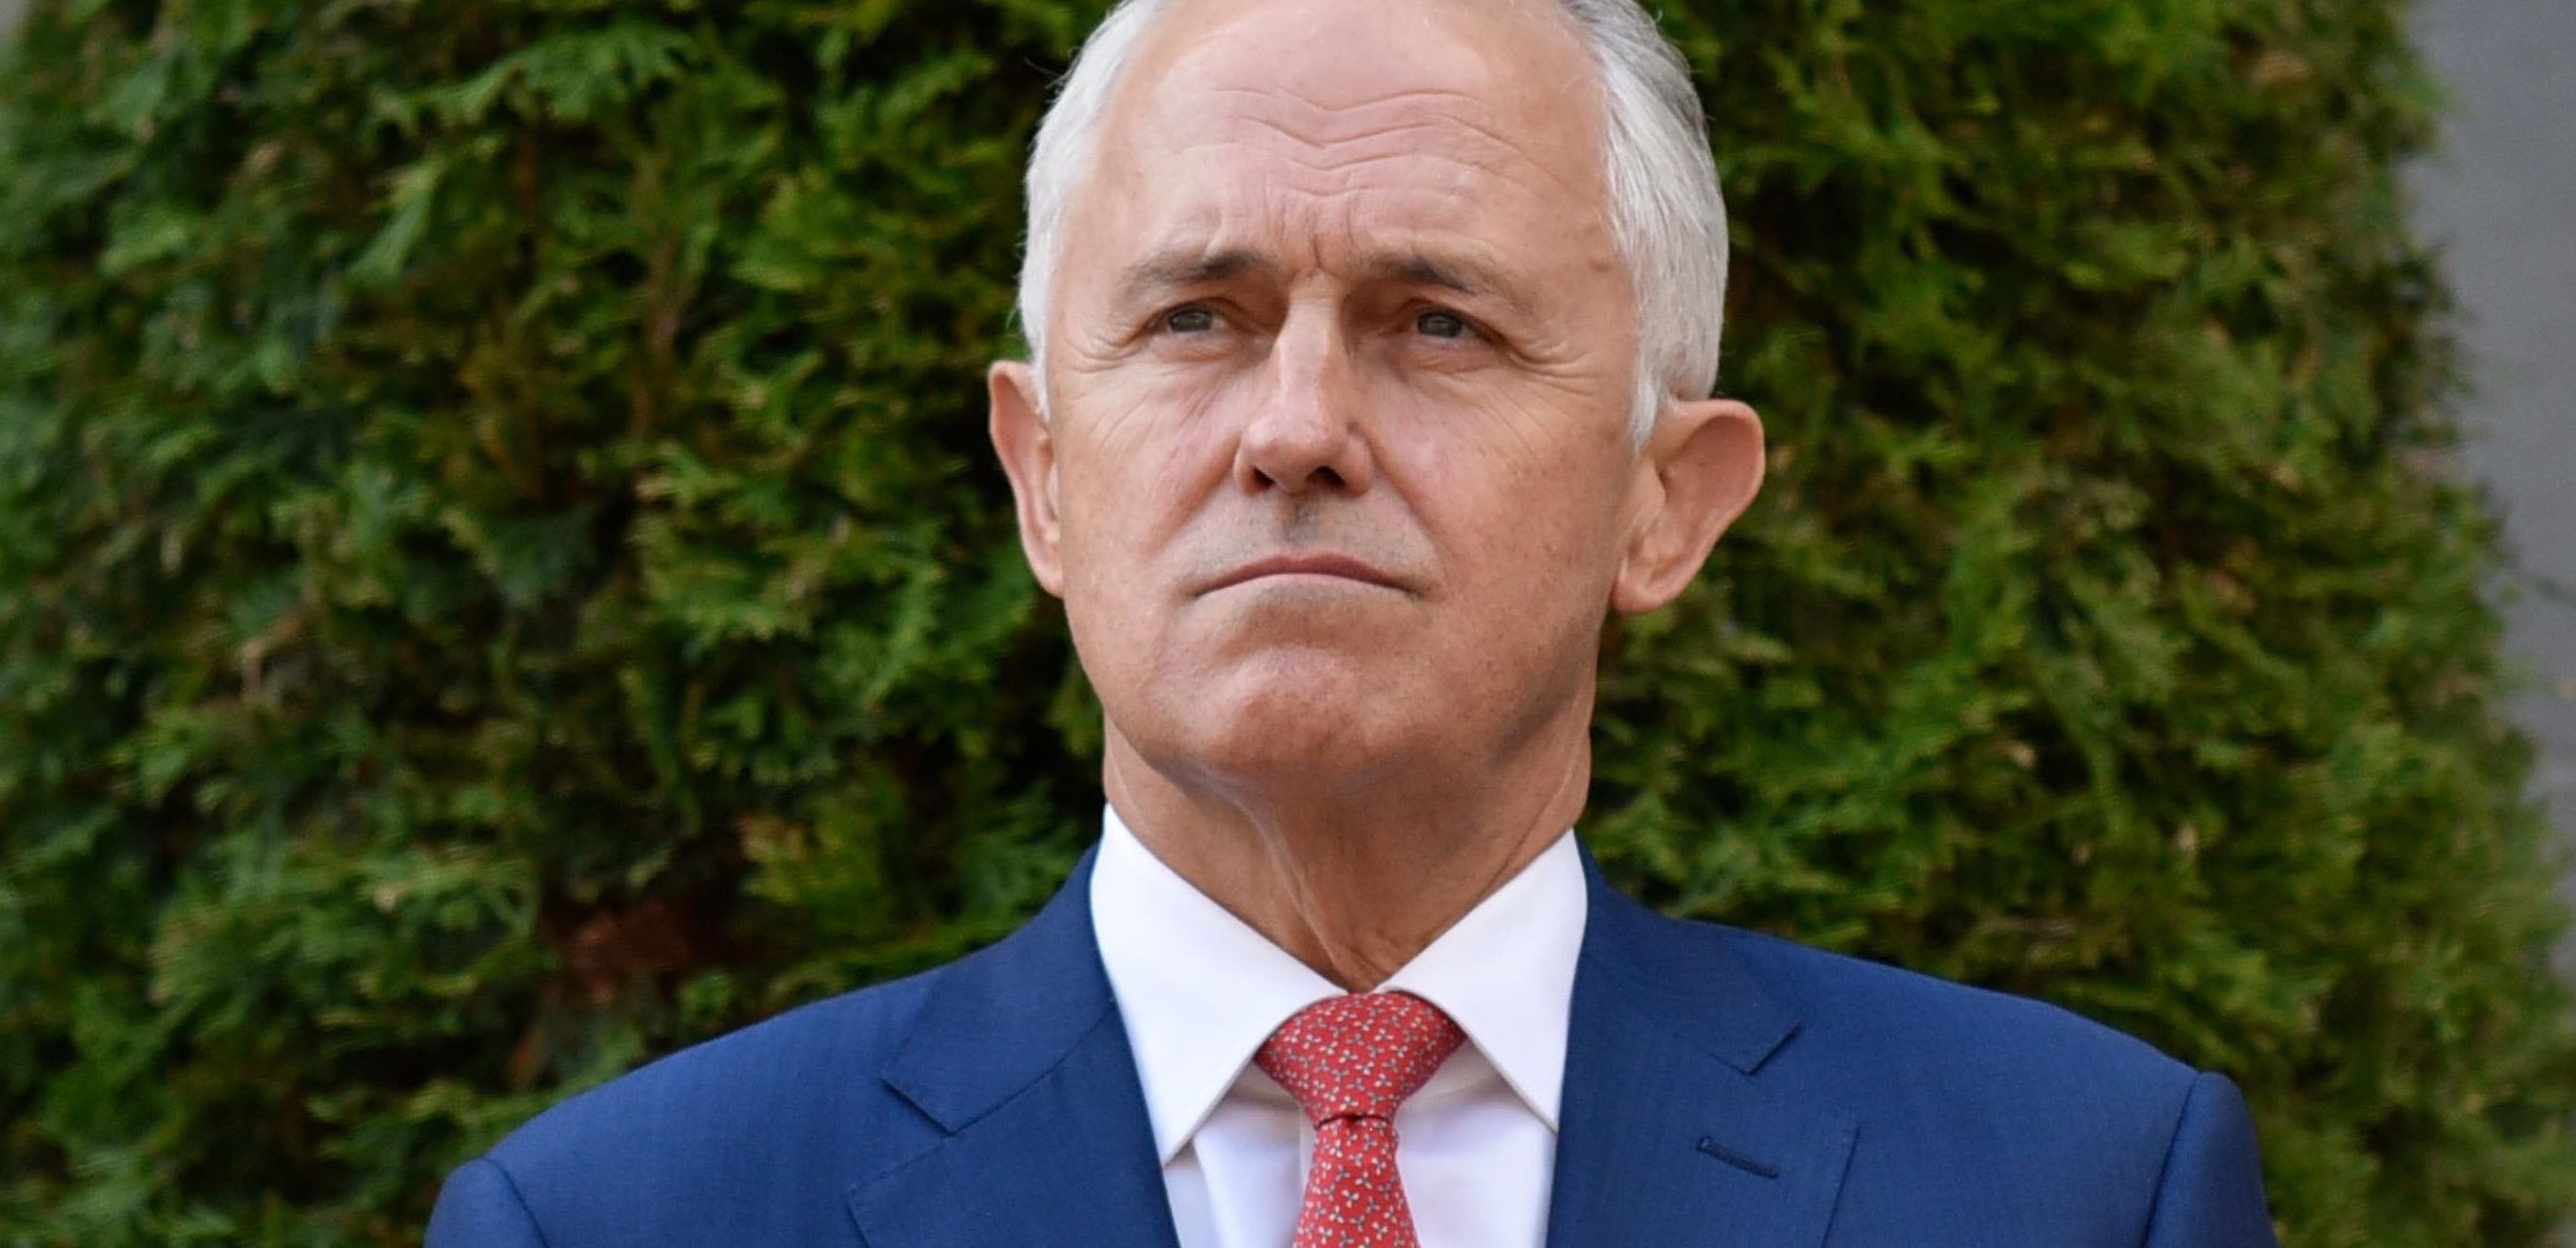 Prime Minister Malcolm Turnbull in February at the opening of the parliament (Photo: Michael Masters/Getty)